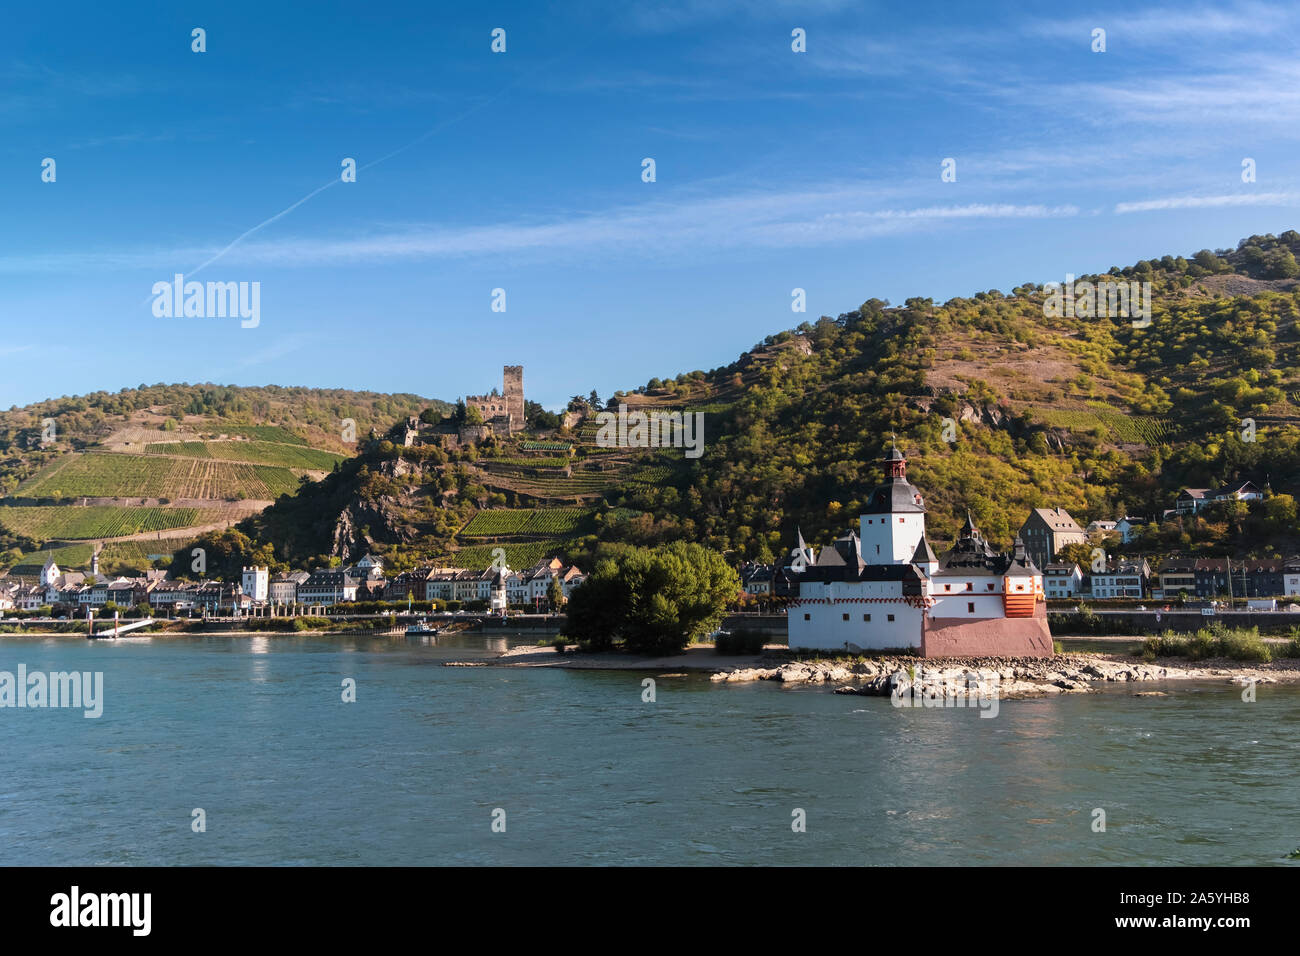 View of Pfalzgrafenstein Castle, known as the Pfalz, a famous toll castle on the Falkenau island and Gutenfels castle on the bank of the Rhine river. Stock Photo